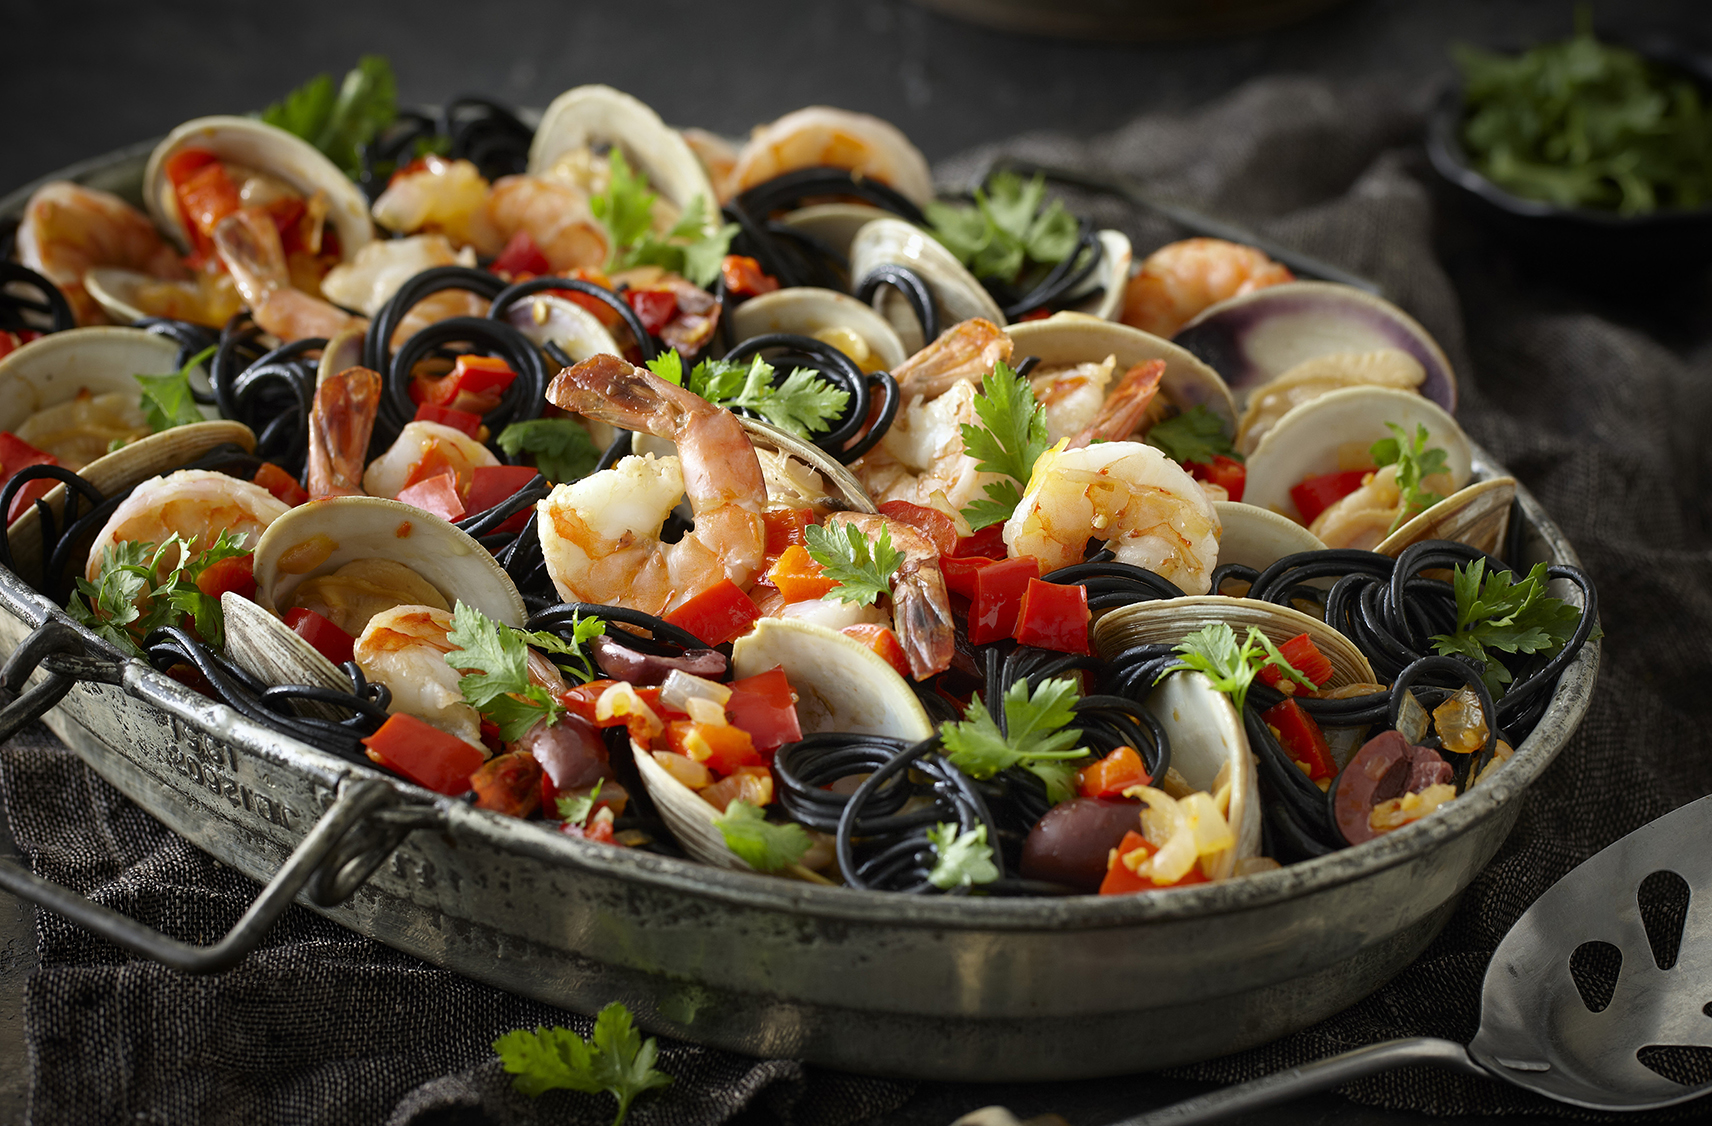 A shallow pot containing black squid ink spaghetti with clams, shrimp & red peppers next to a serving spoon.